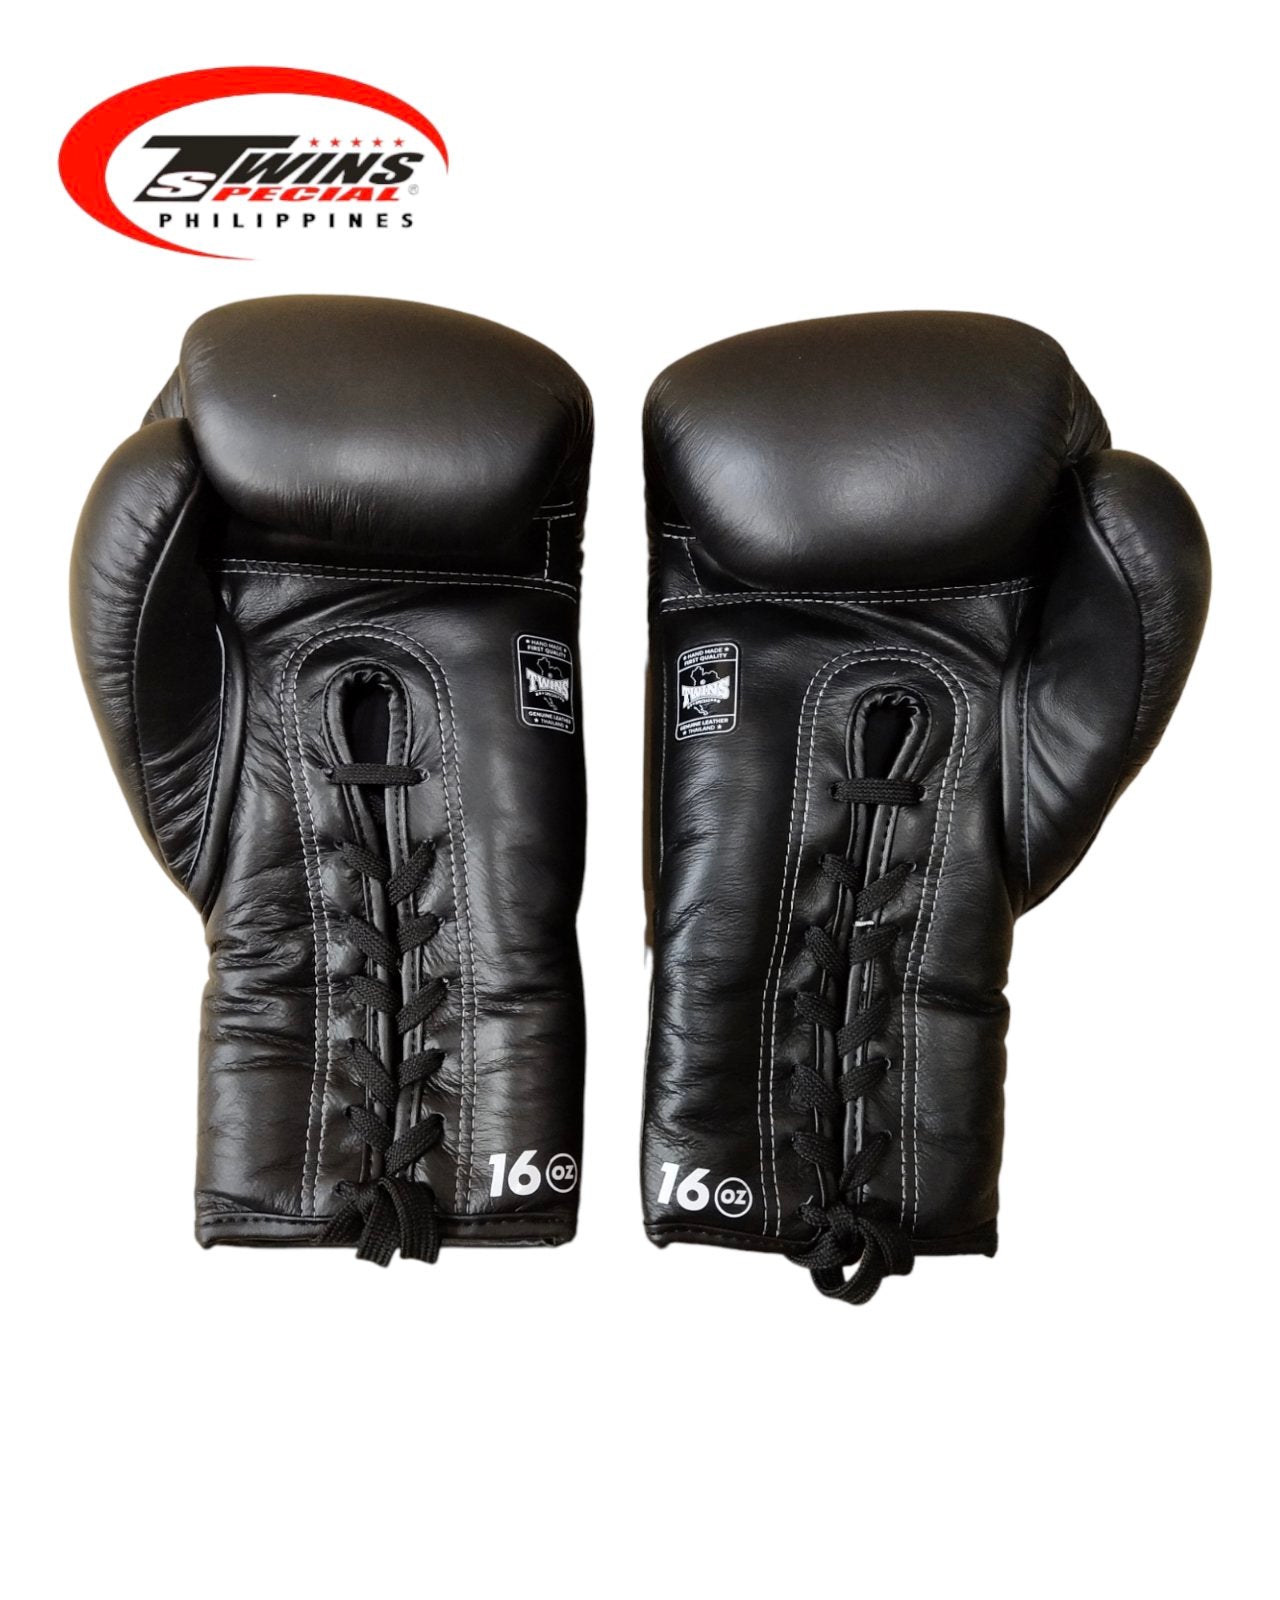 TWINS SPECIAL BGLL-1 Lace-Up Boxing Gloves [Black]